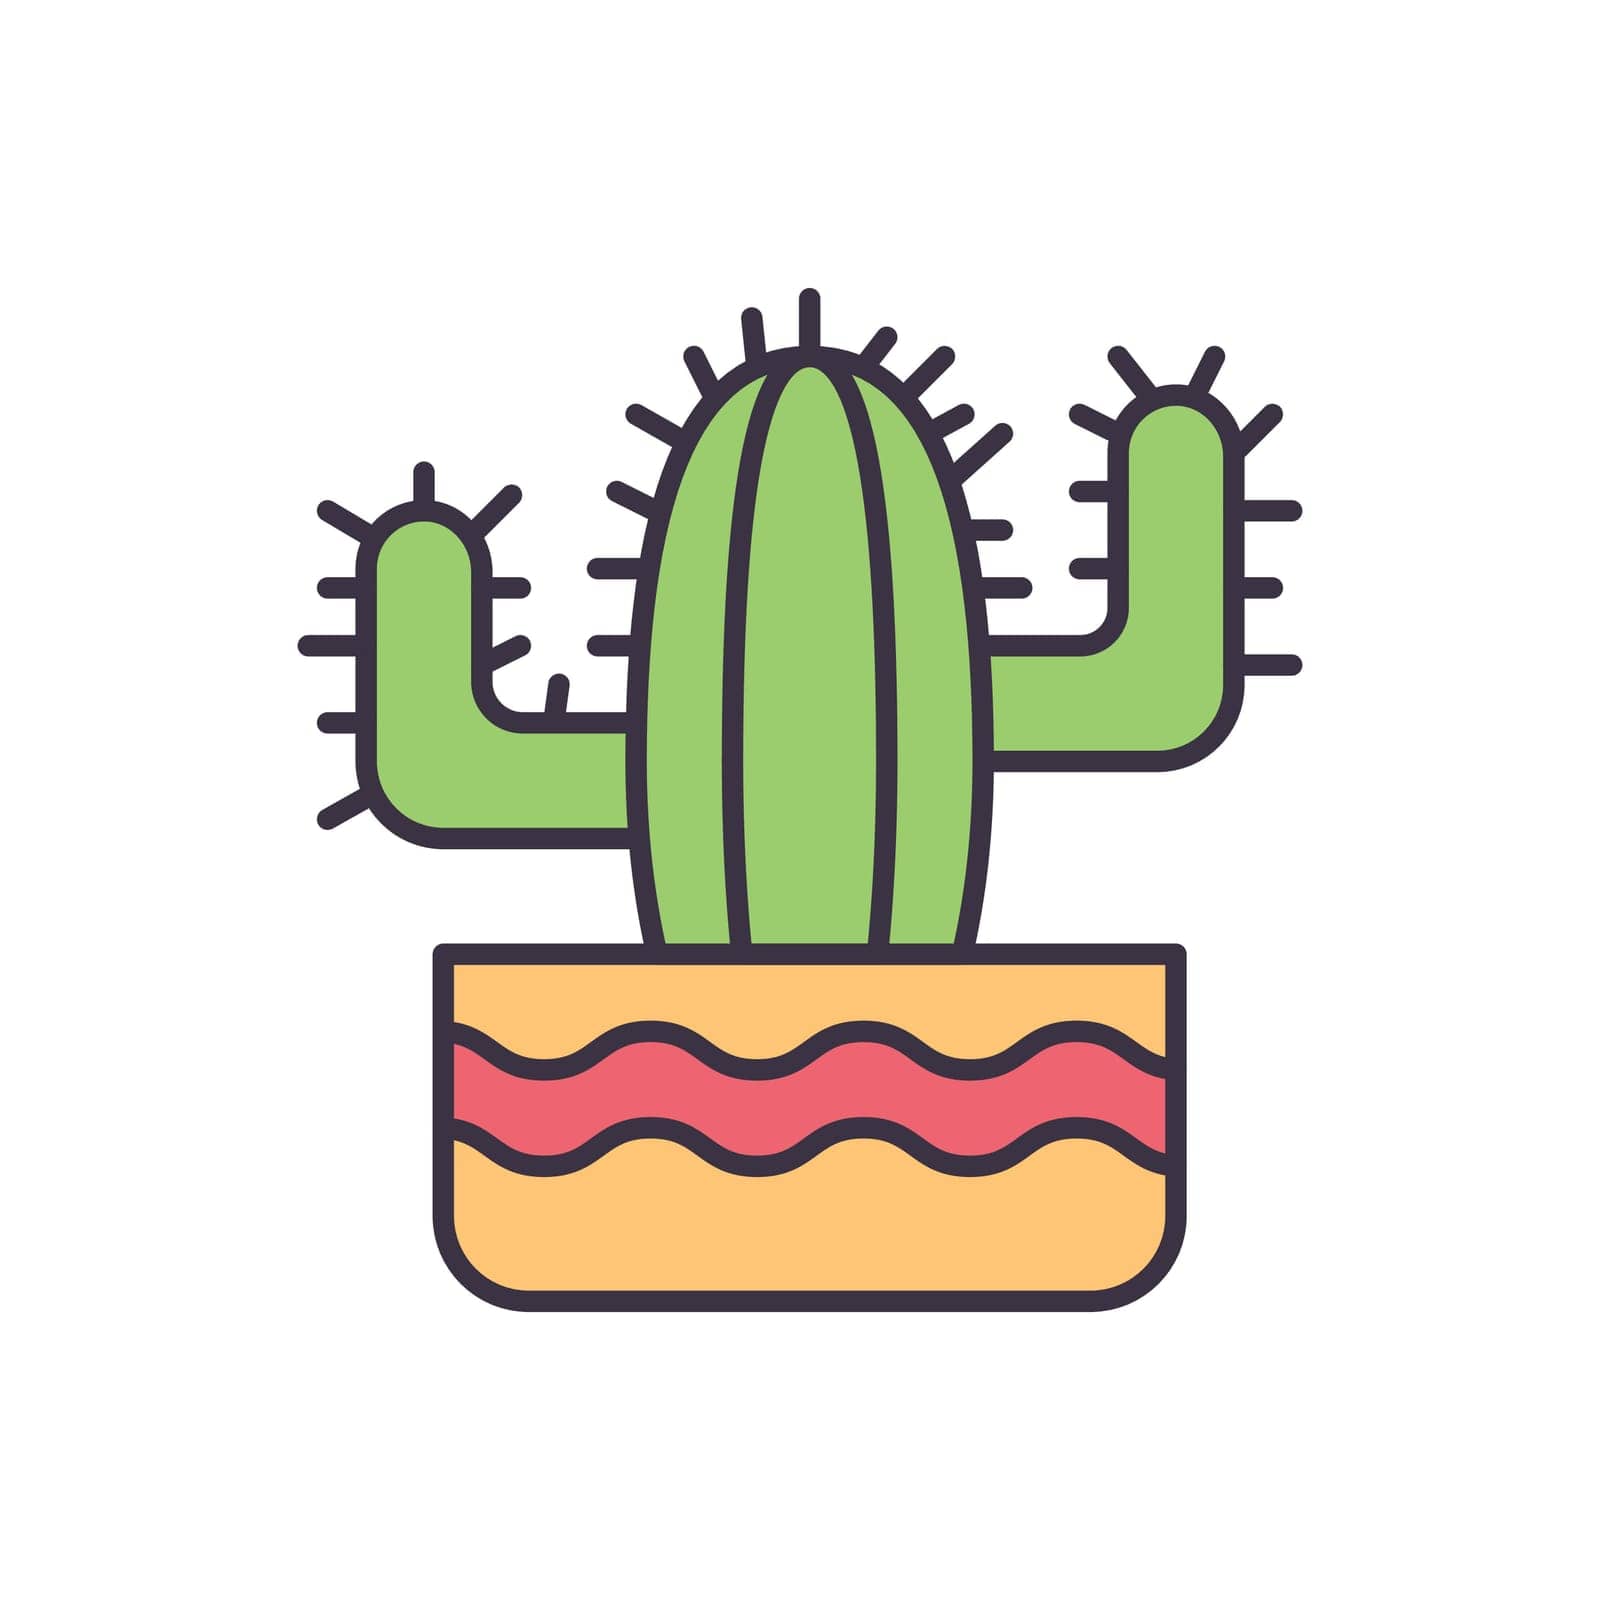 Cactus related vector icon by smoki